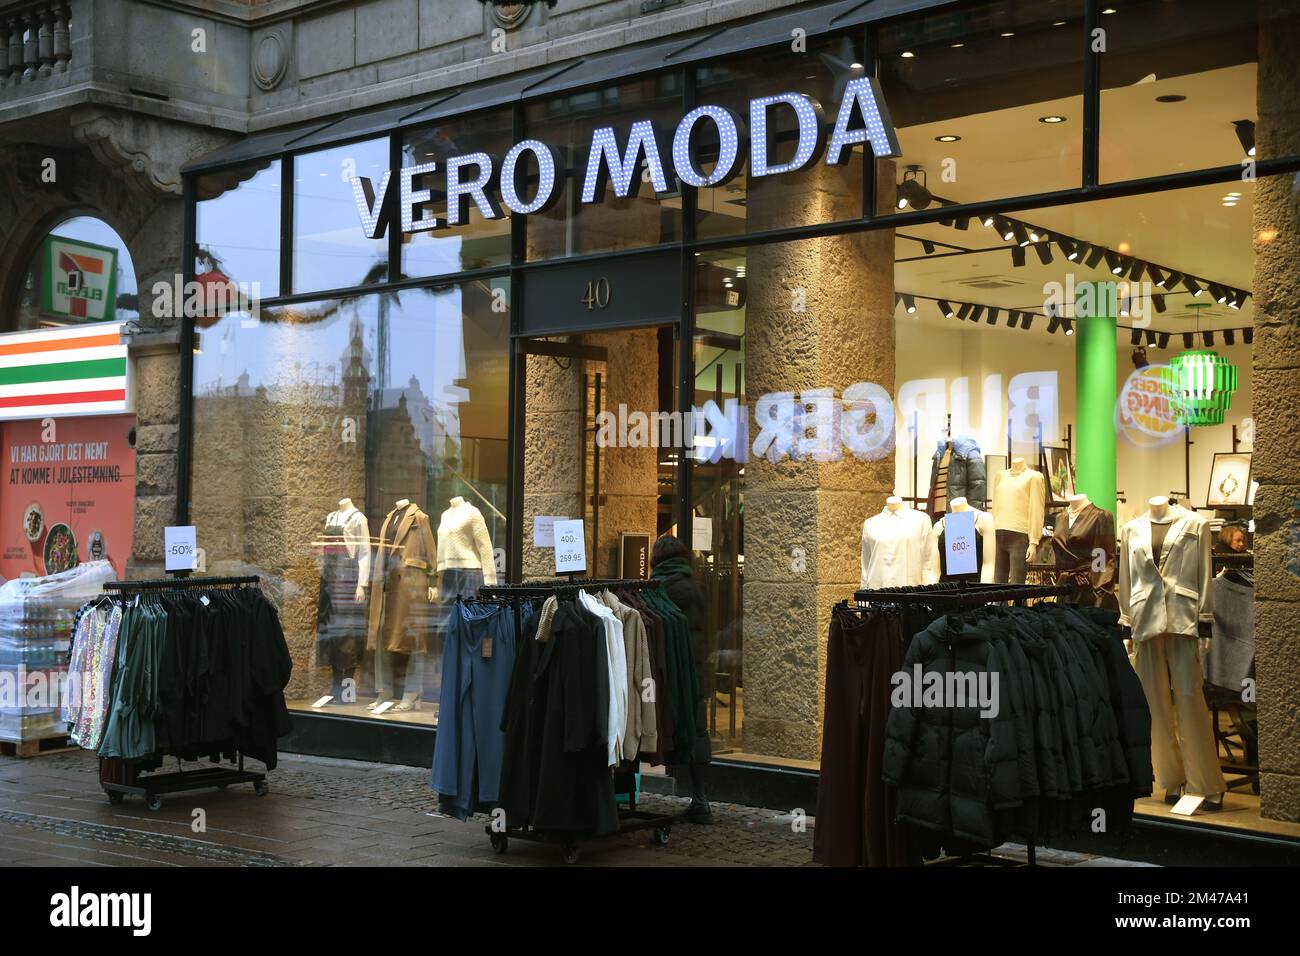 Vero moda stock photography and images - Alamy